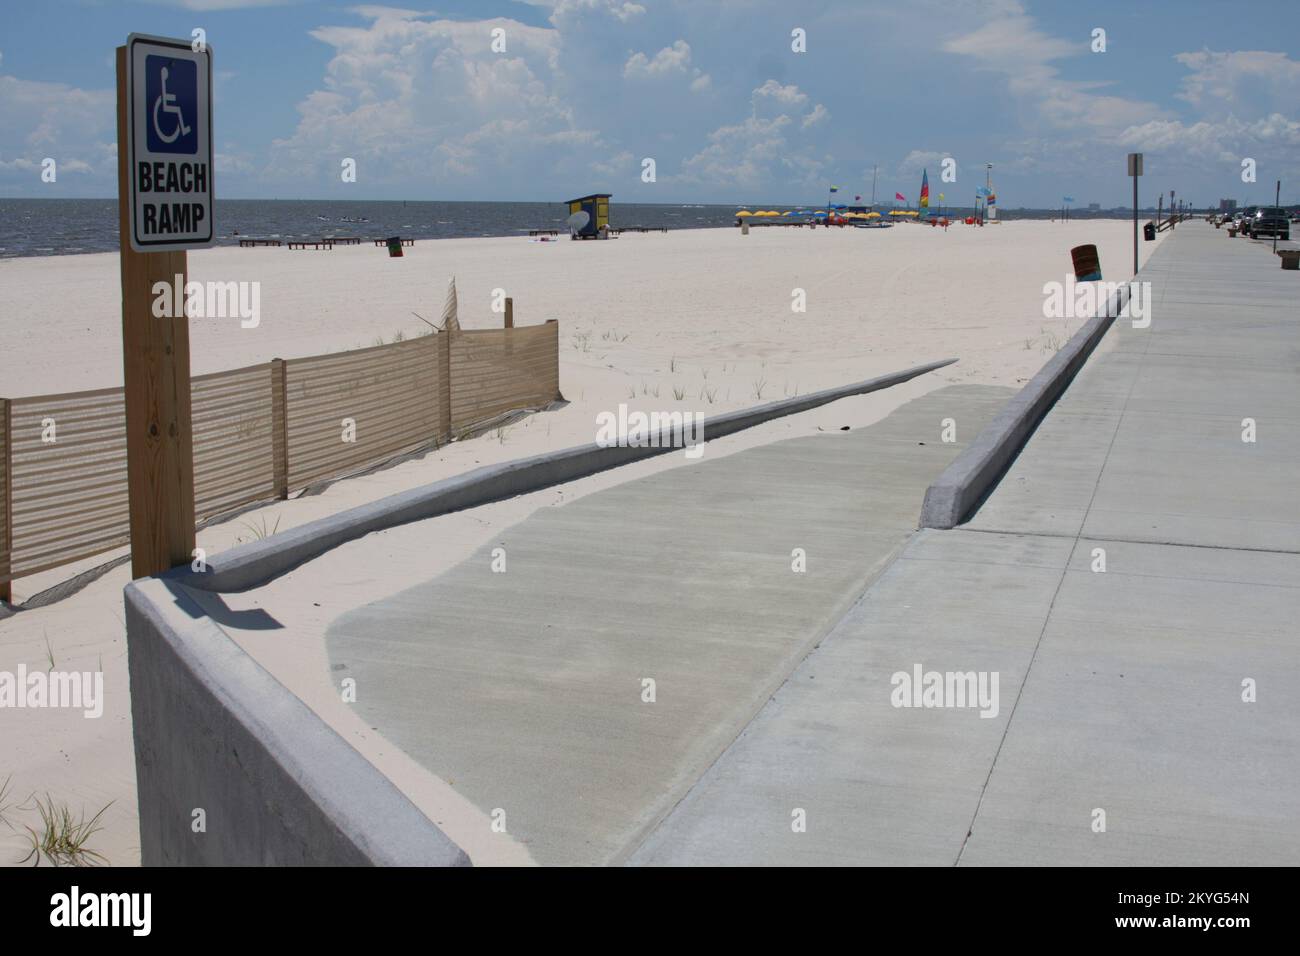 Hurricane/Tropical Storm - Gulfport, Miss. , August 20, 2010 -- The new boardwalk and beach access ramps were completed with construction funds provided by FEMA to help rebuild the Gulf Coast after Hurricane Katrina. Stock Photo